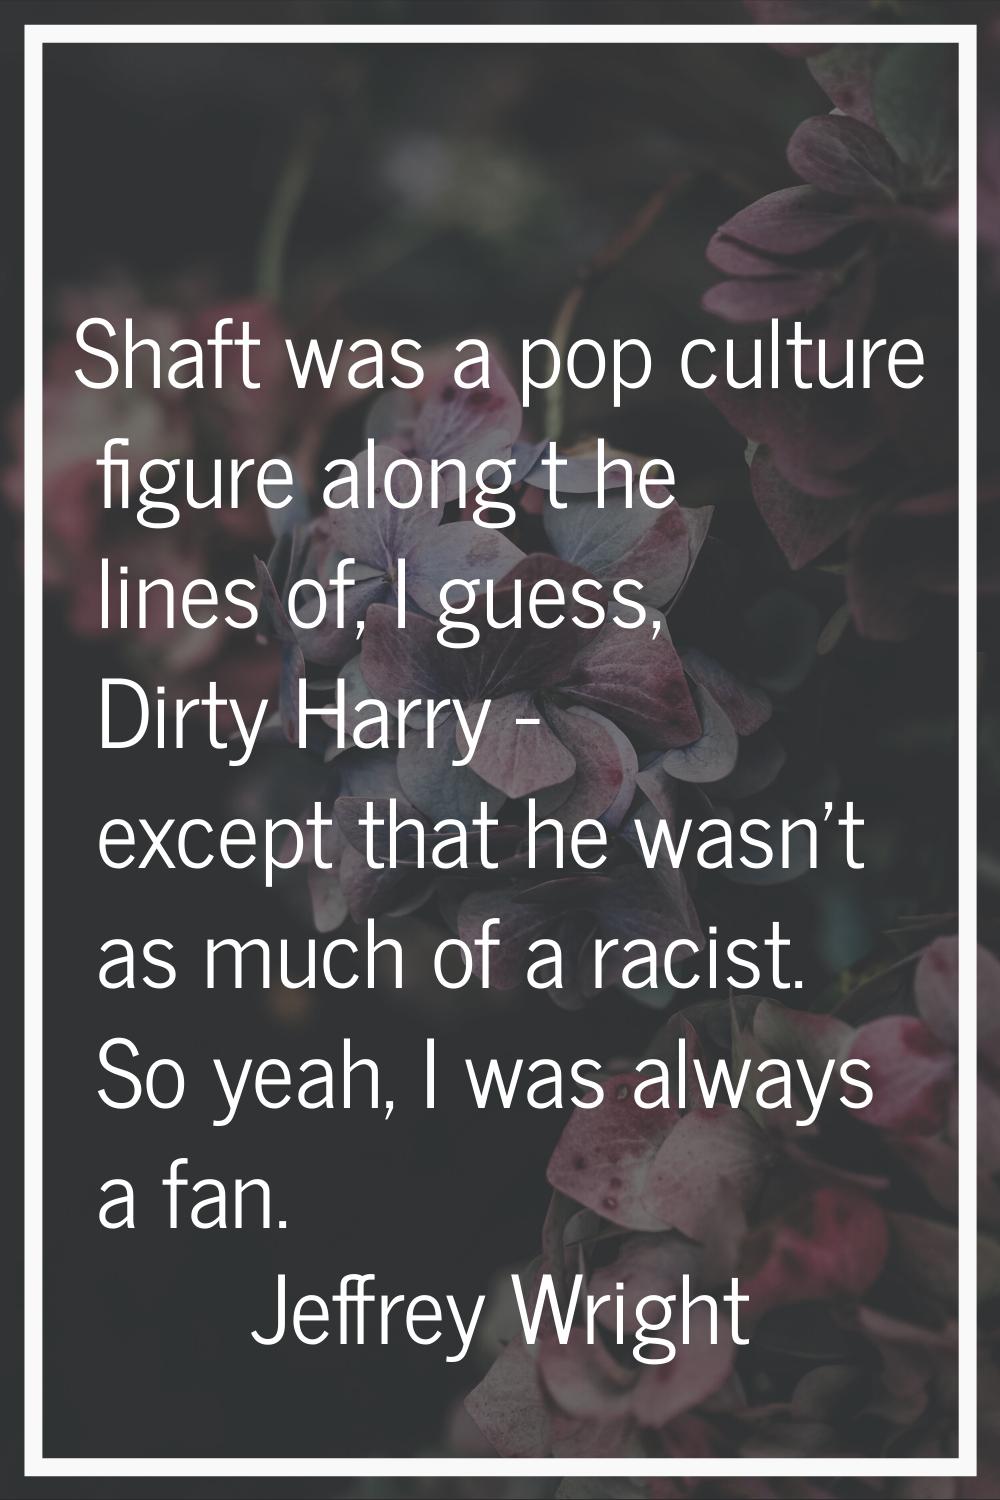 Shaft was a pop culture figure along t he lines of, I guess, Dirty Harry - except that he wasn't as